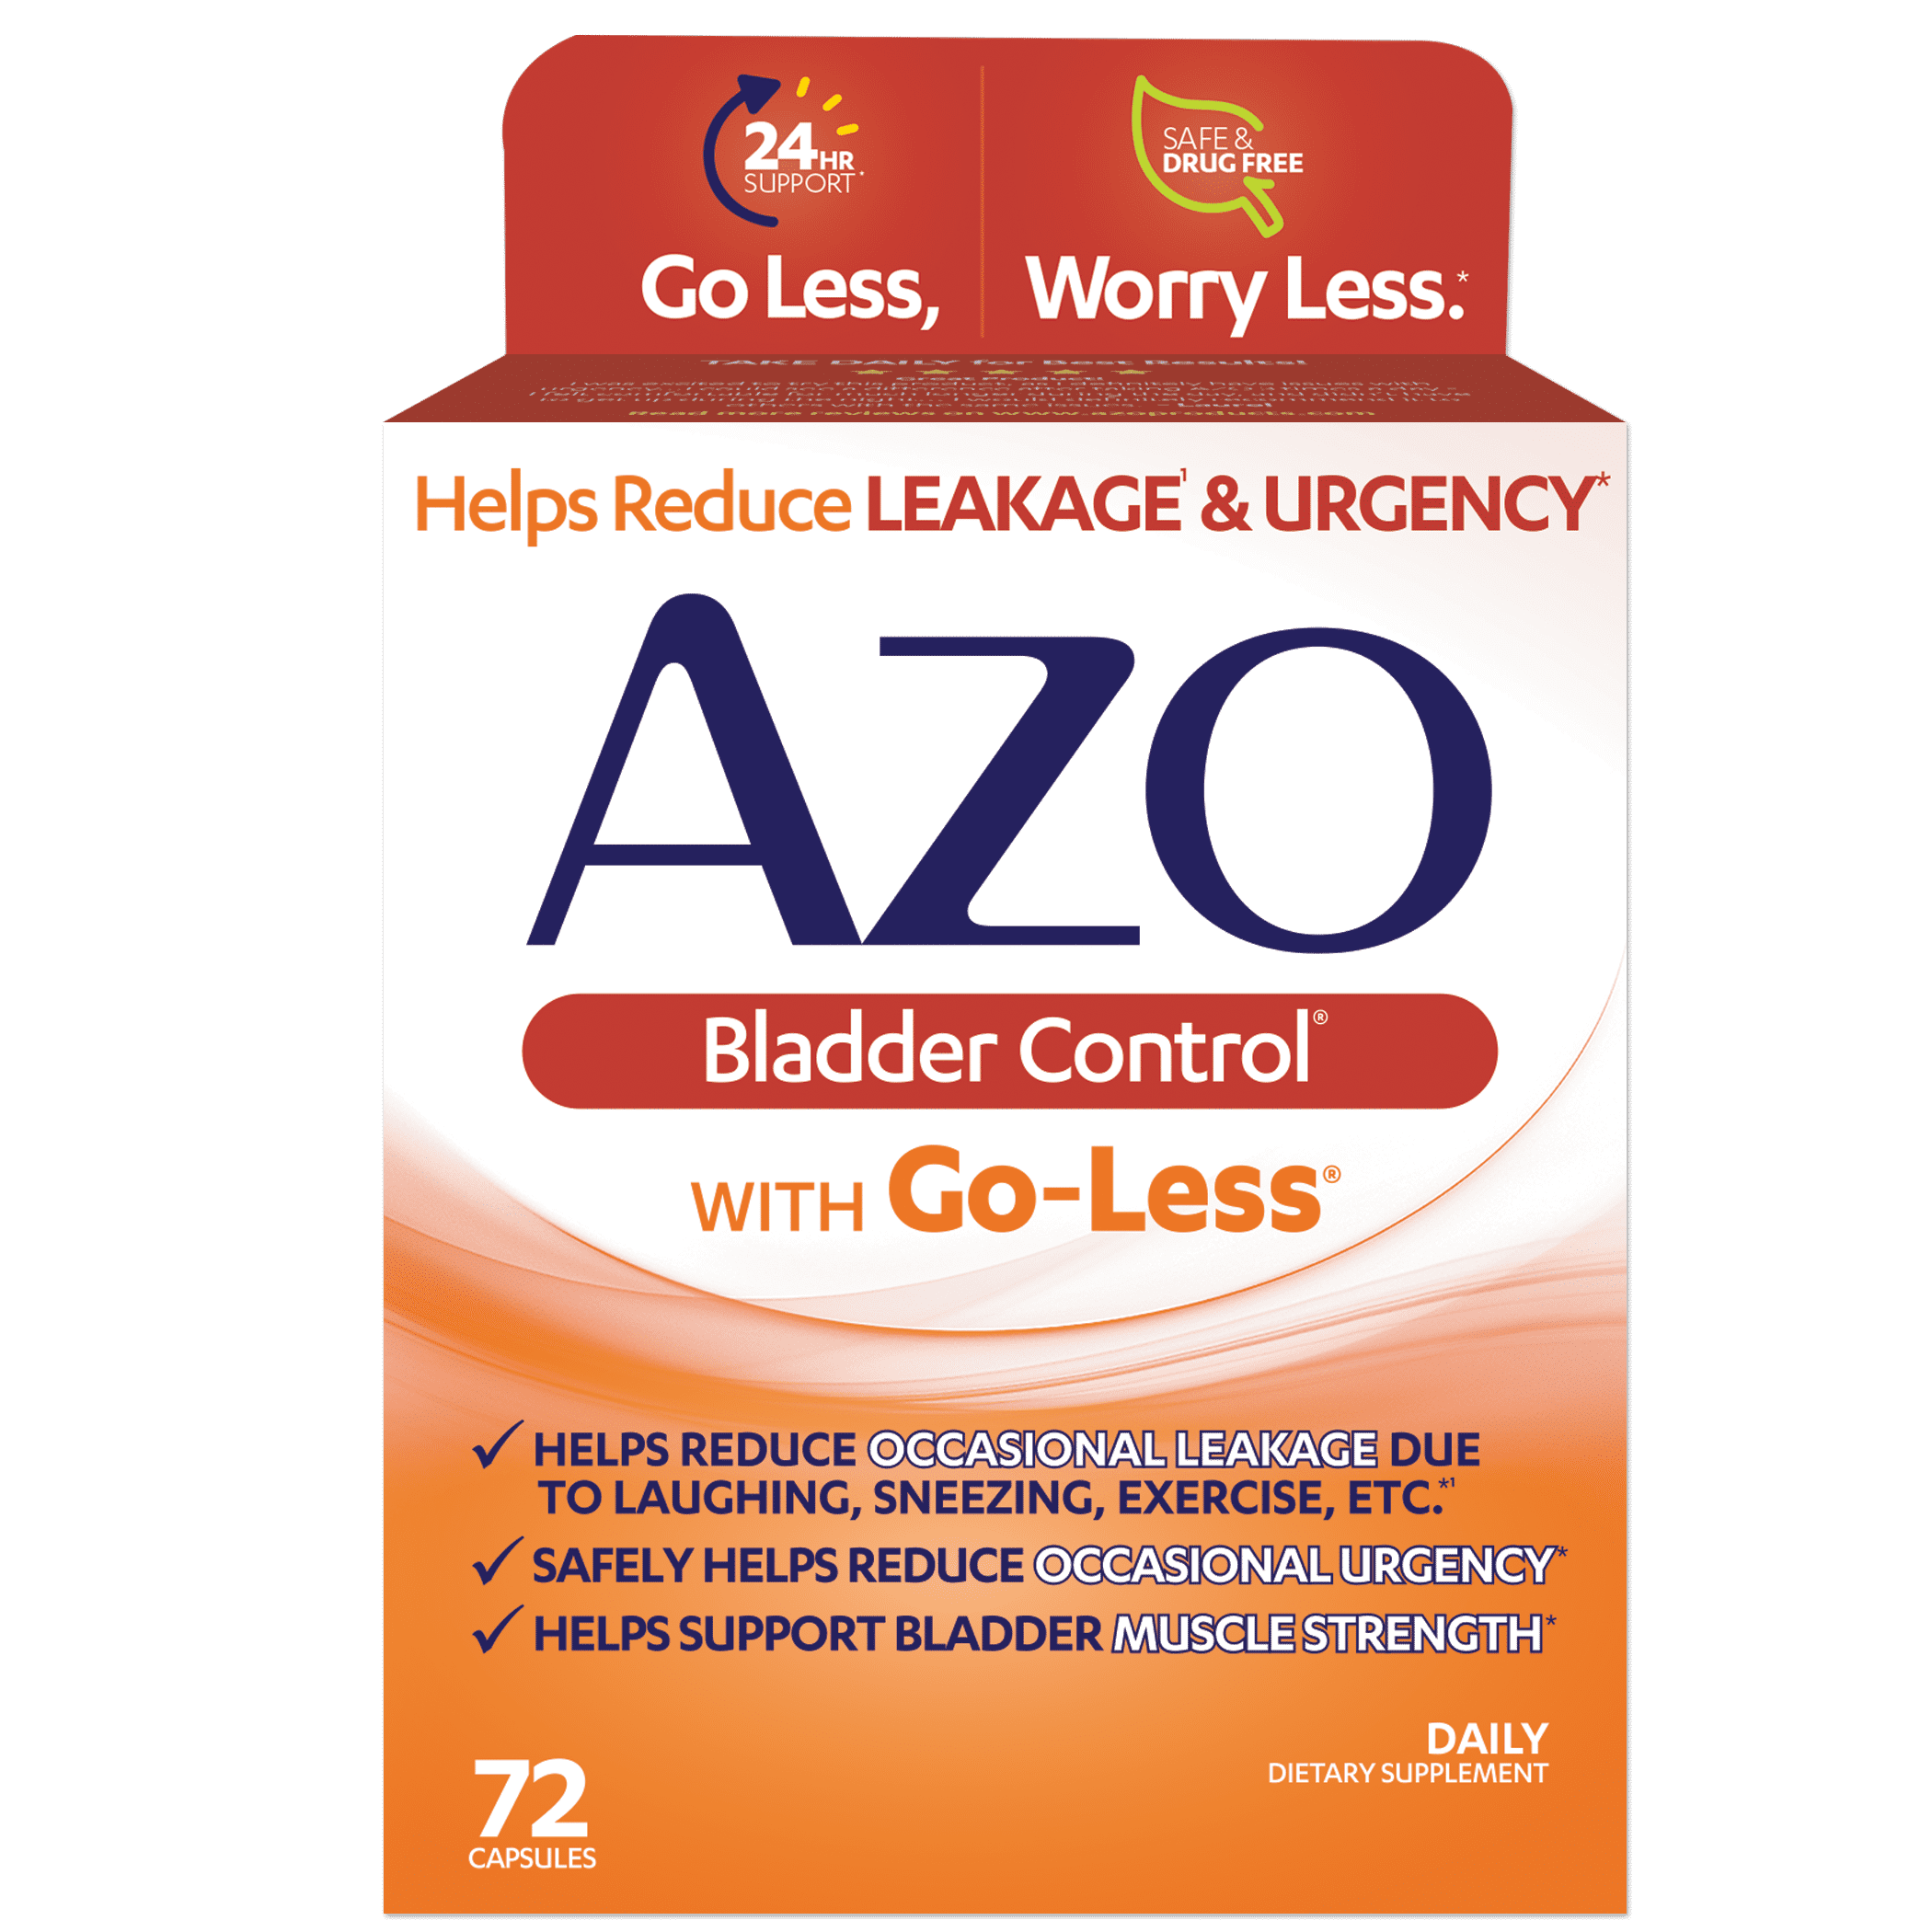 azo-bladder-control-with-go-less-daily-supplement-helps-reduce